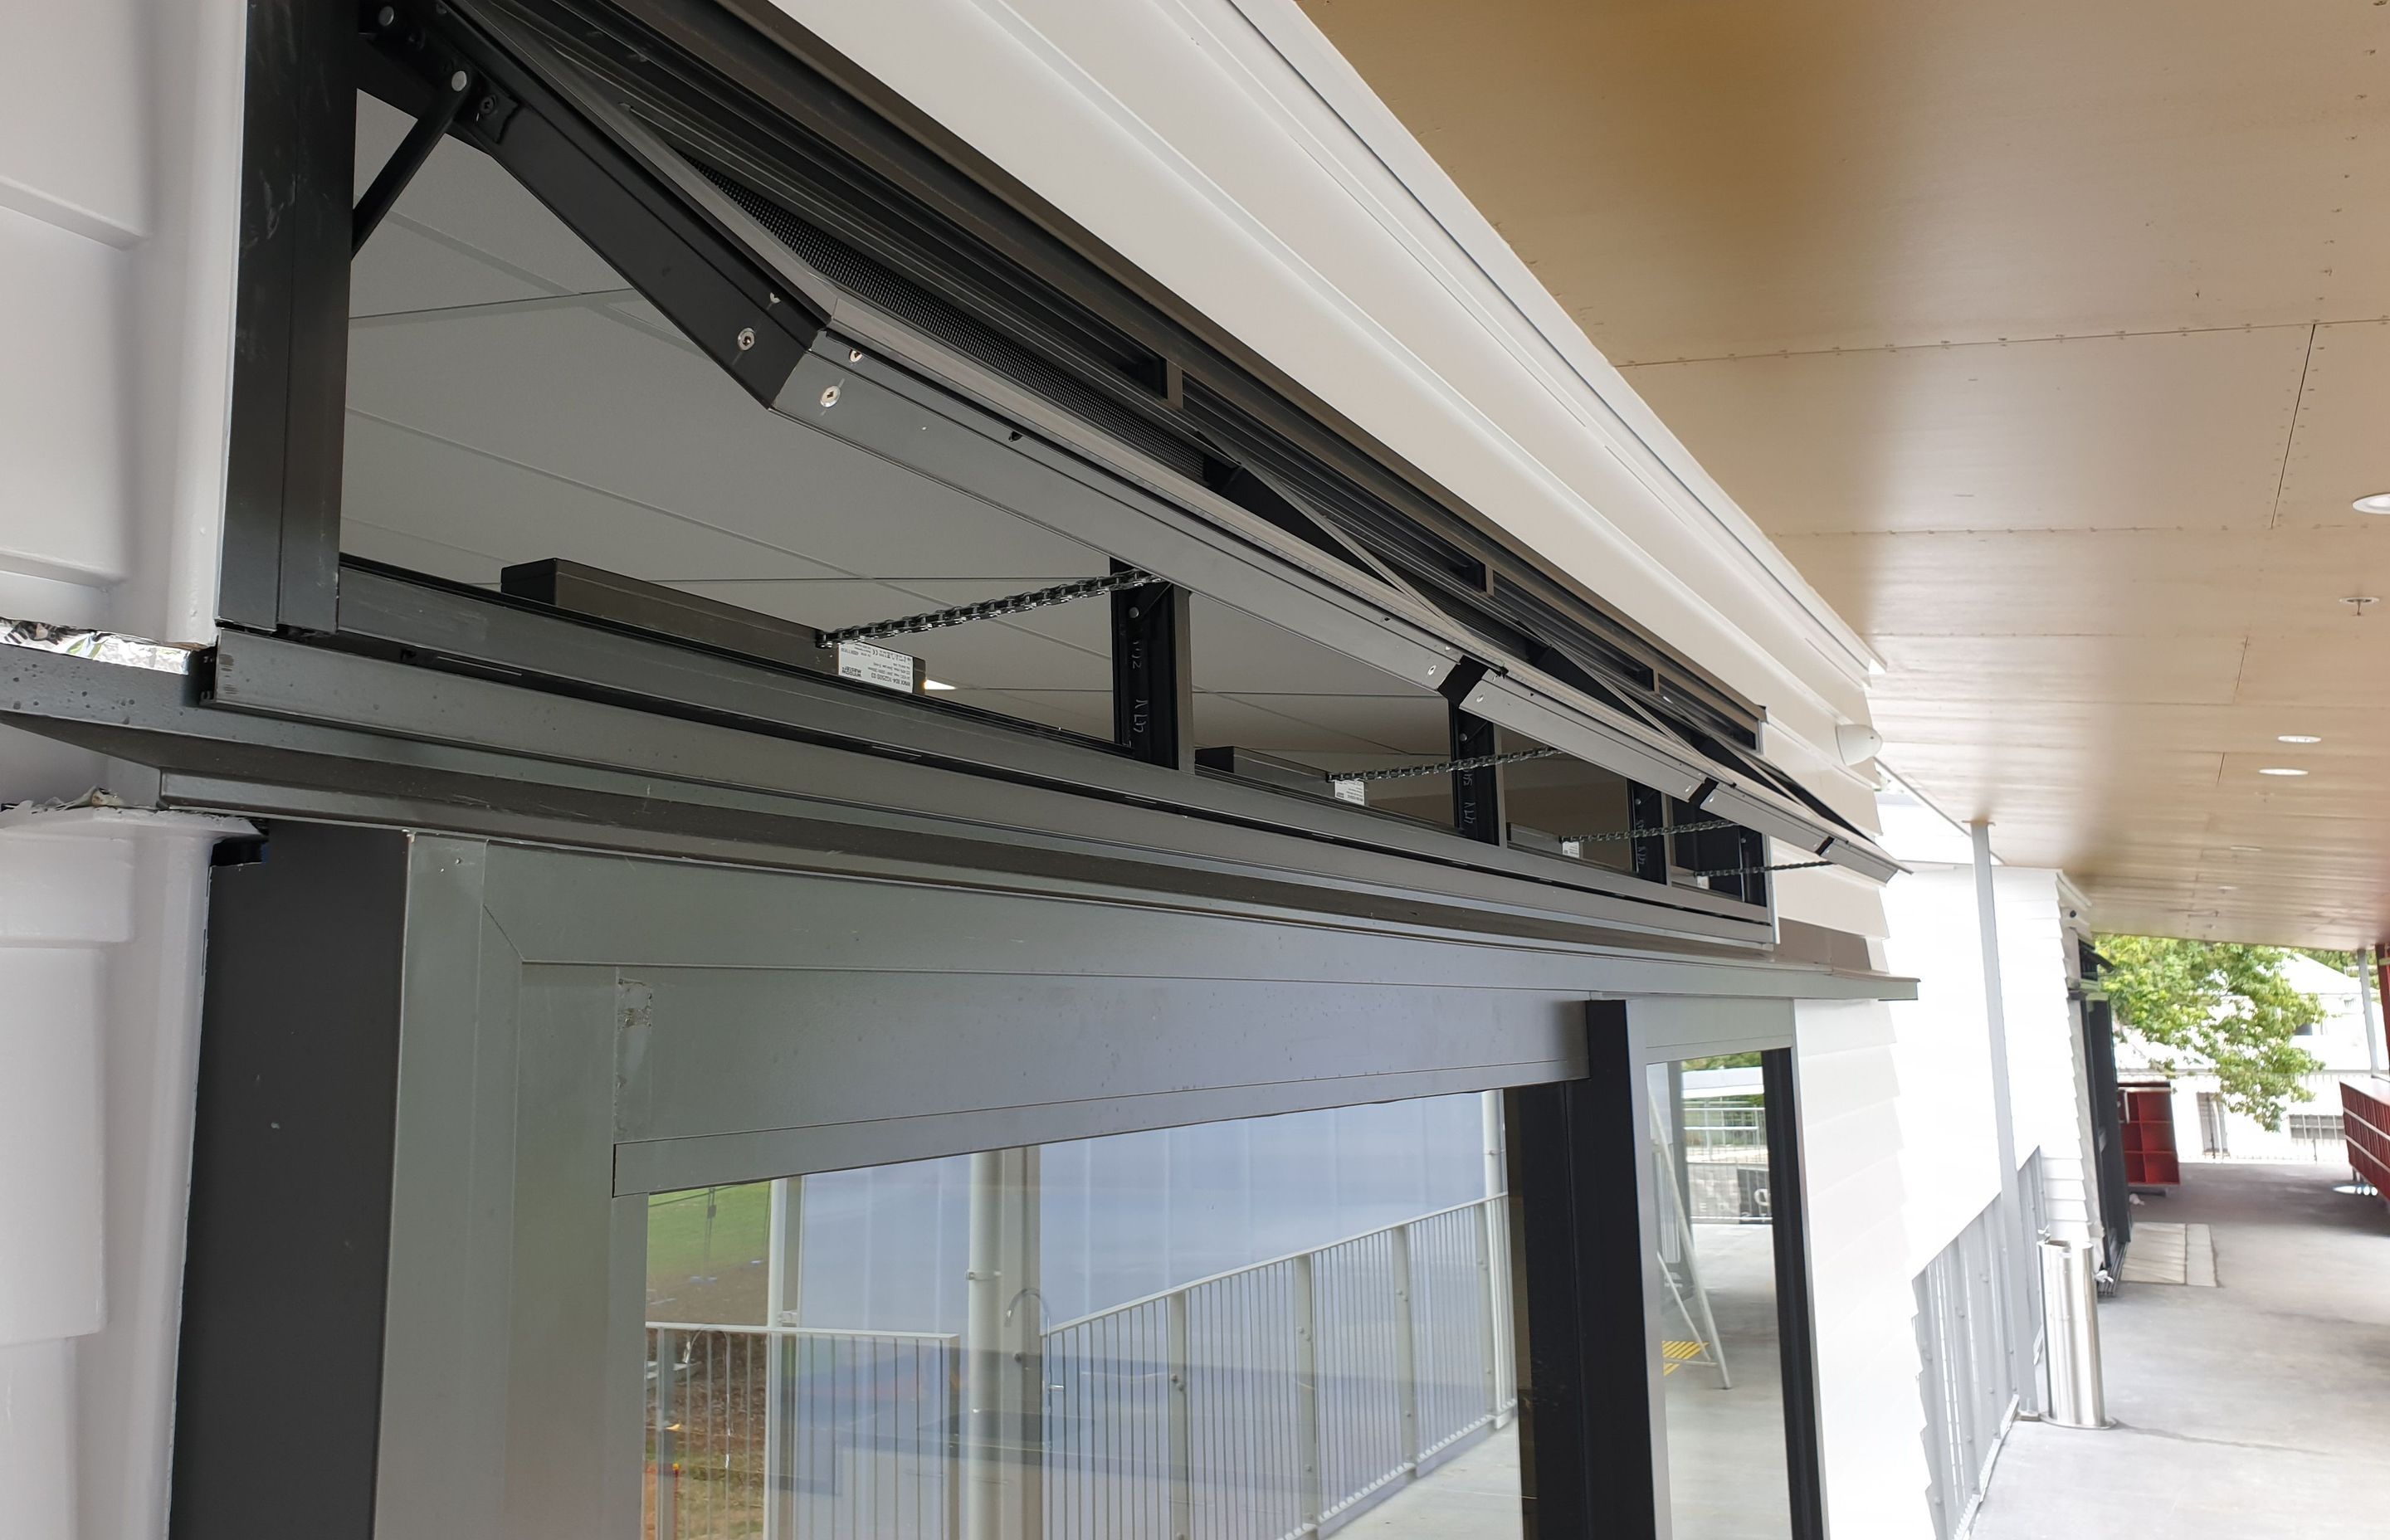 At Waterview Primary School, WindowMaster Smart WCC PLUS controllers and WindowMaster WMX804 chain drives where provided to supply ventilation across four learning studios.